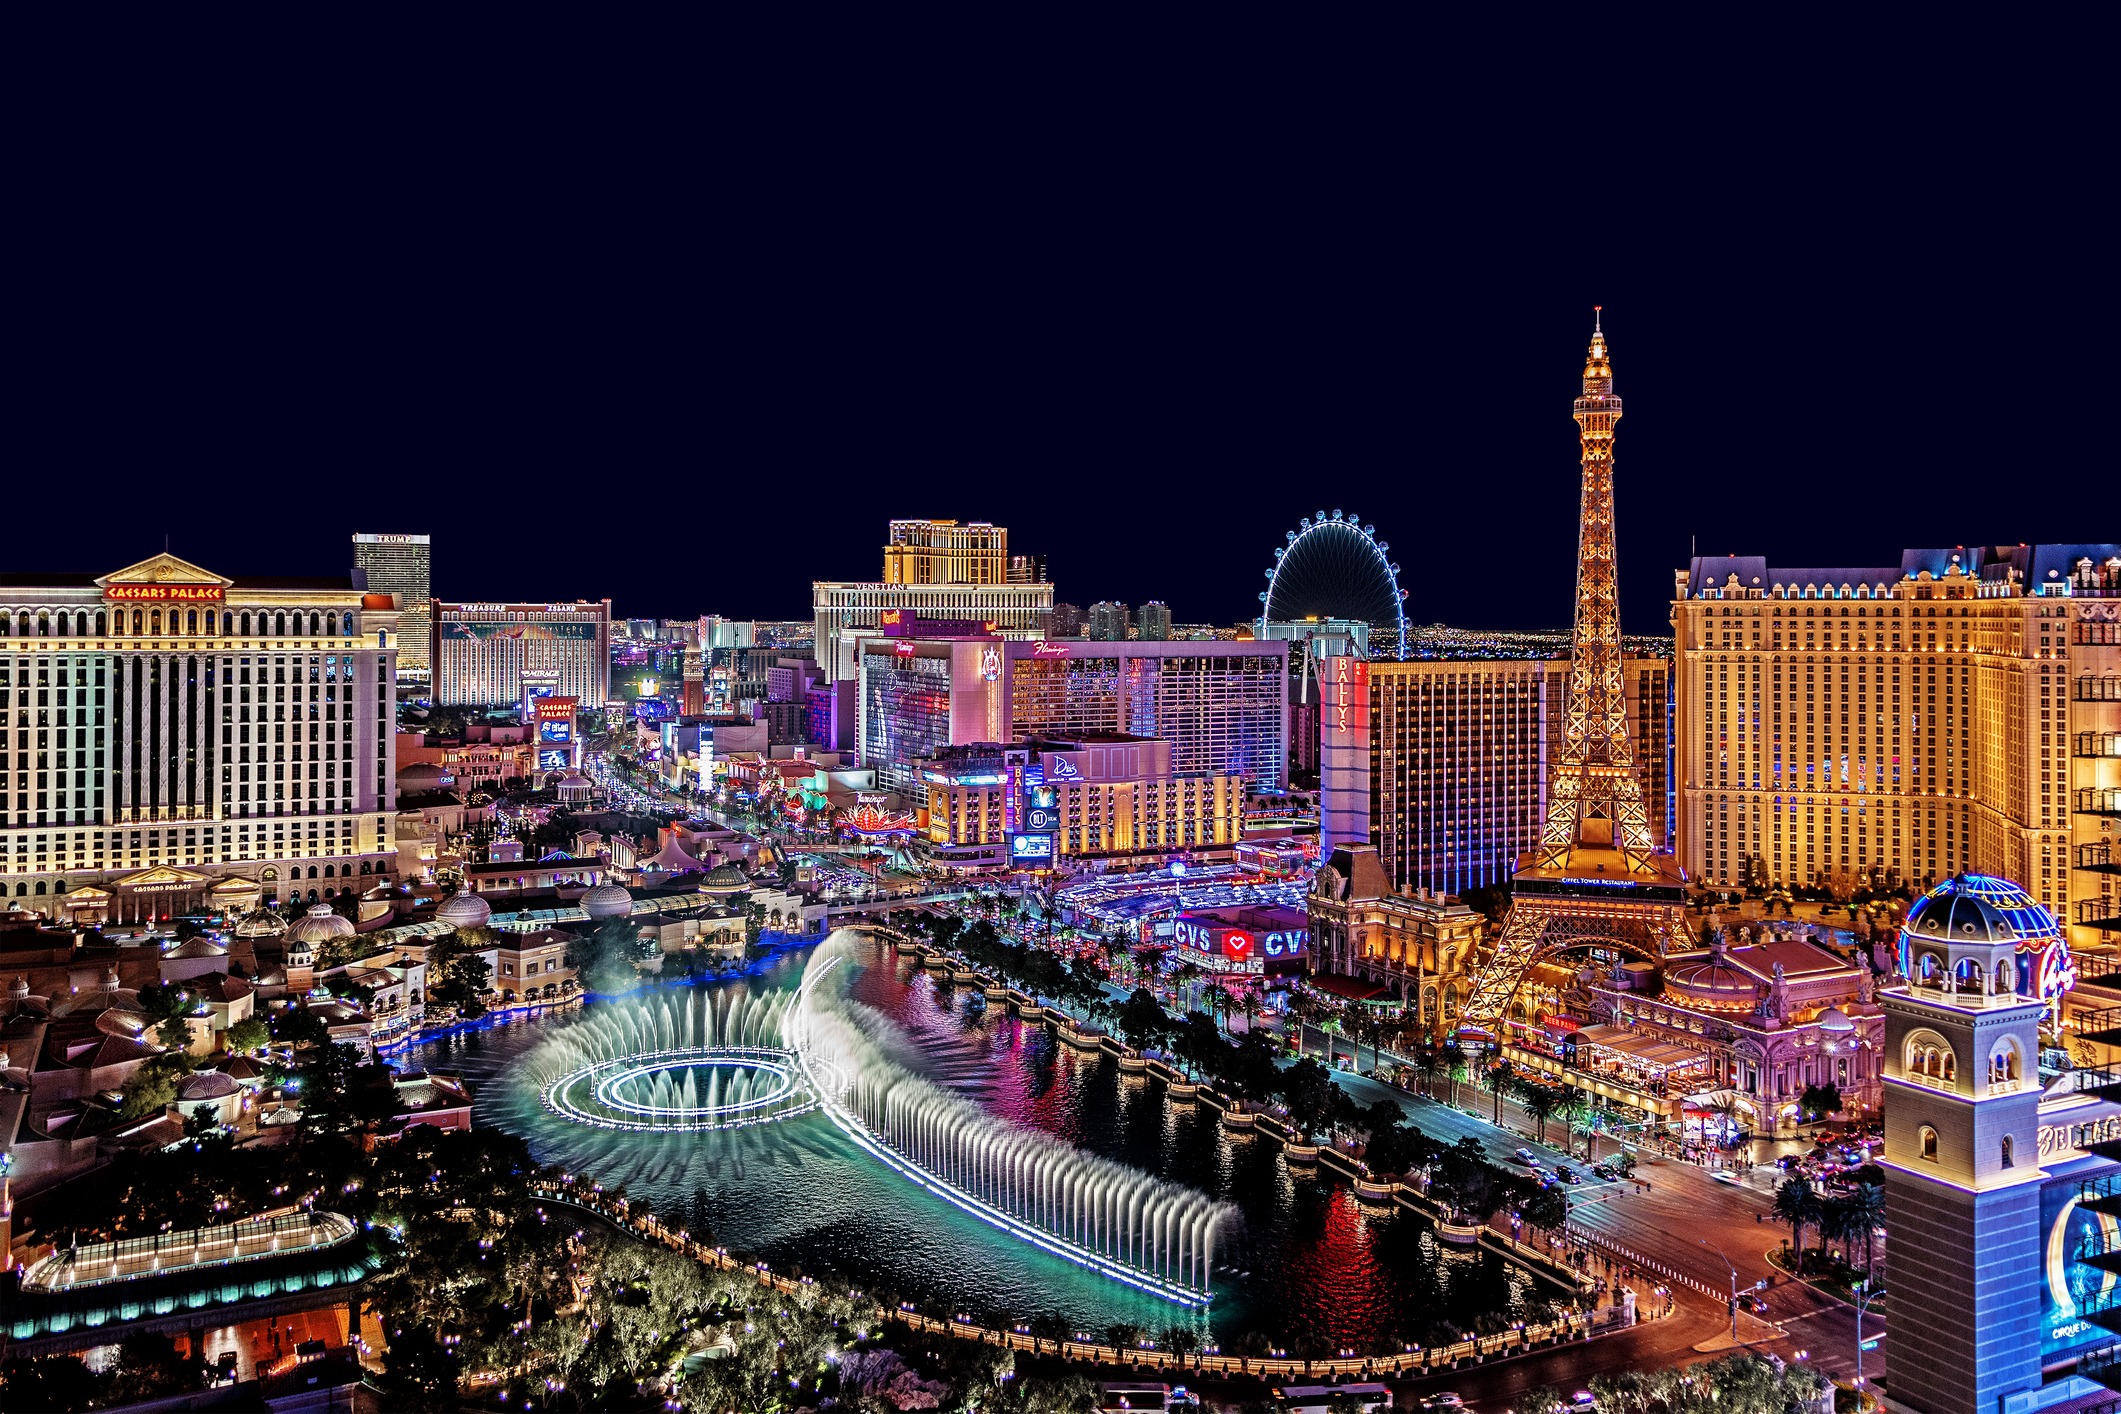 The famous Las Vegas Strip with the Bellagio Fountain. The Strip is home to the largest hotels and casinos in the world.